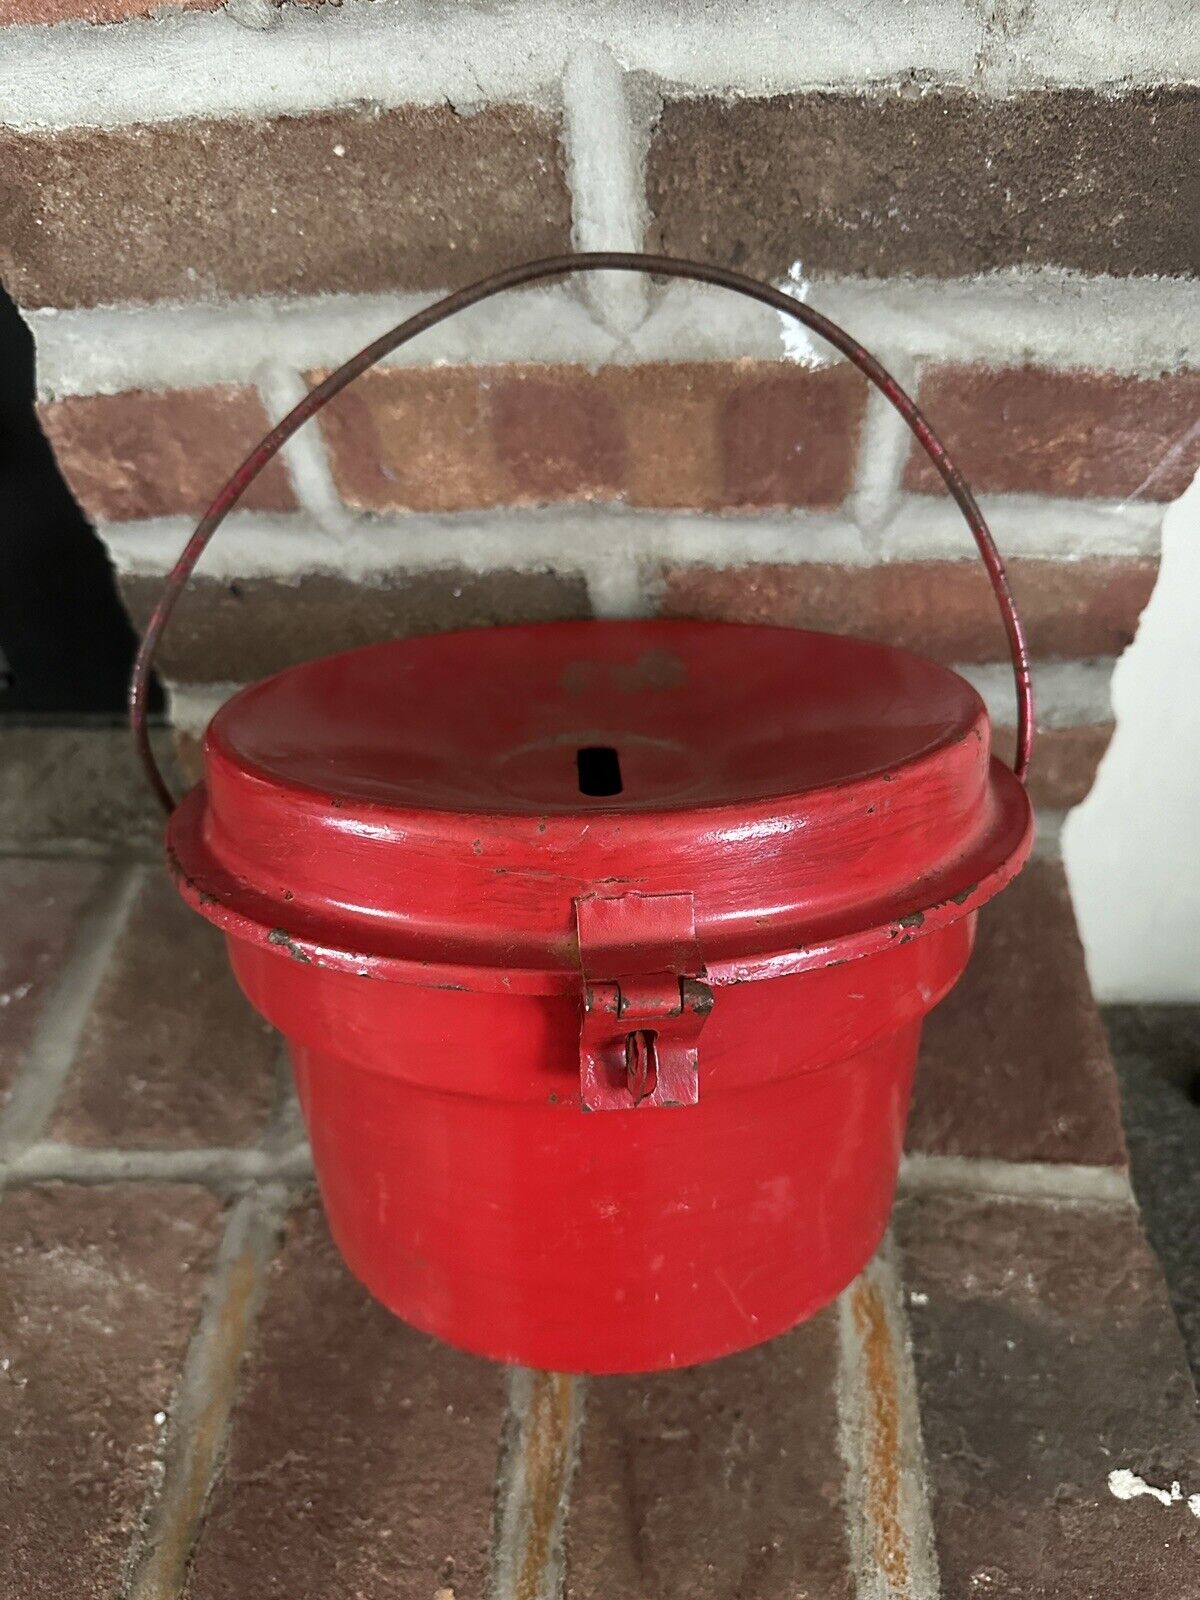 VTG Charity Metal Donation Bucket Can Kettle Money Collection Tip Lockable Hangs